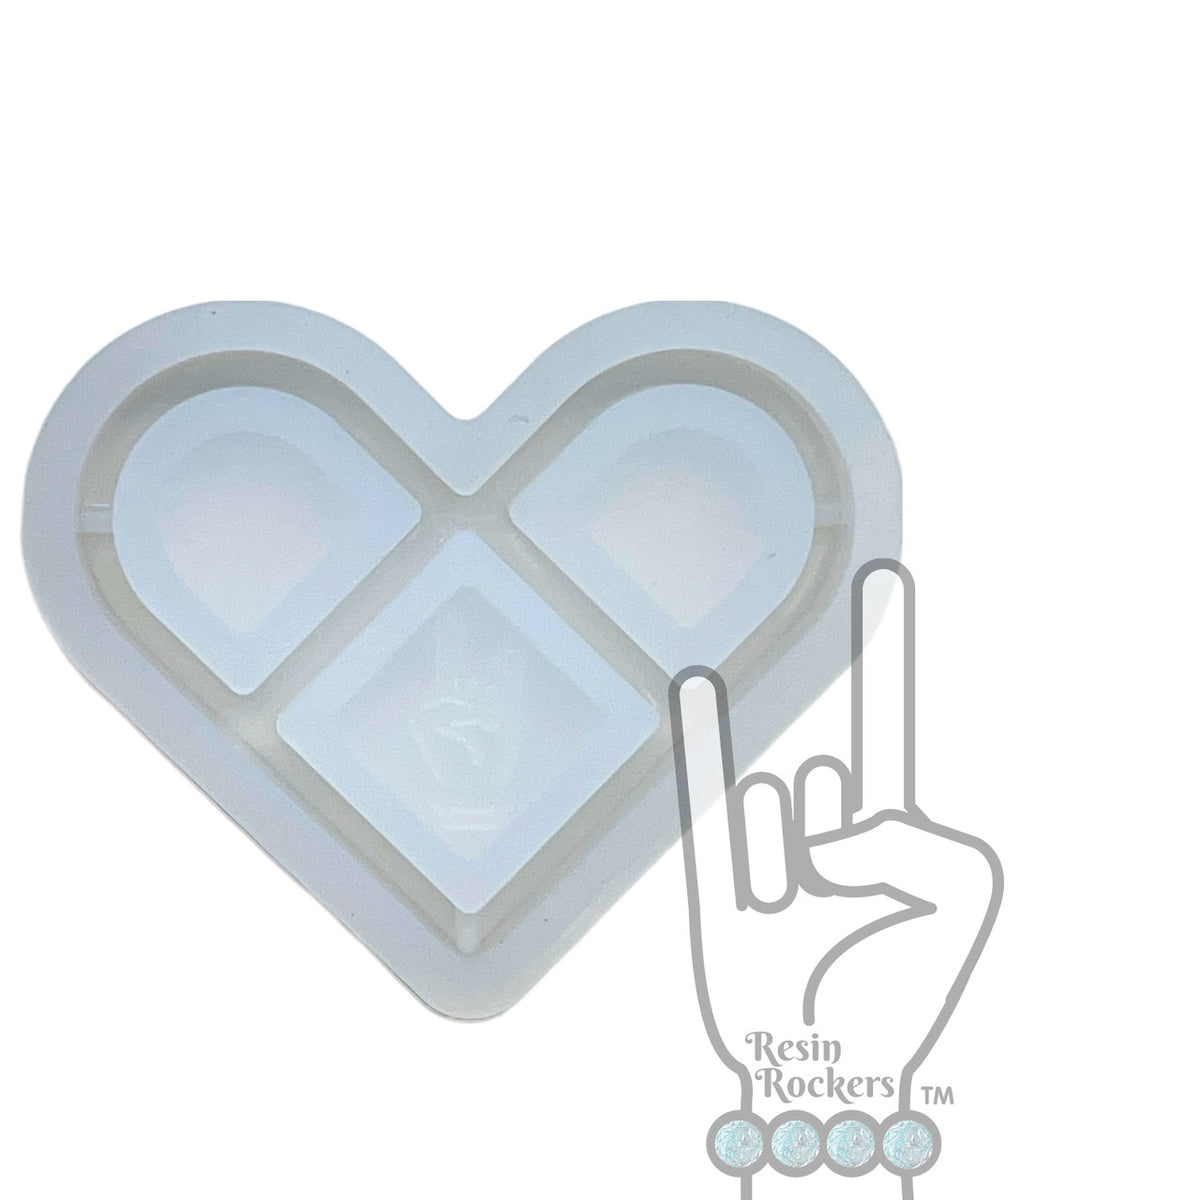 UV Safe Pill Halves in a Heart Shape Shaker Badge Reel or Phone Grip Shaker Silicone Mold for Epoxy and UV Resin Art